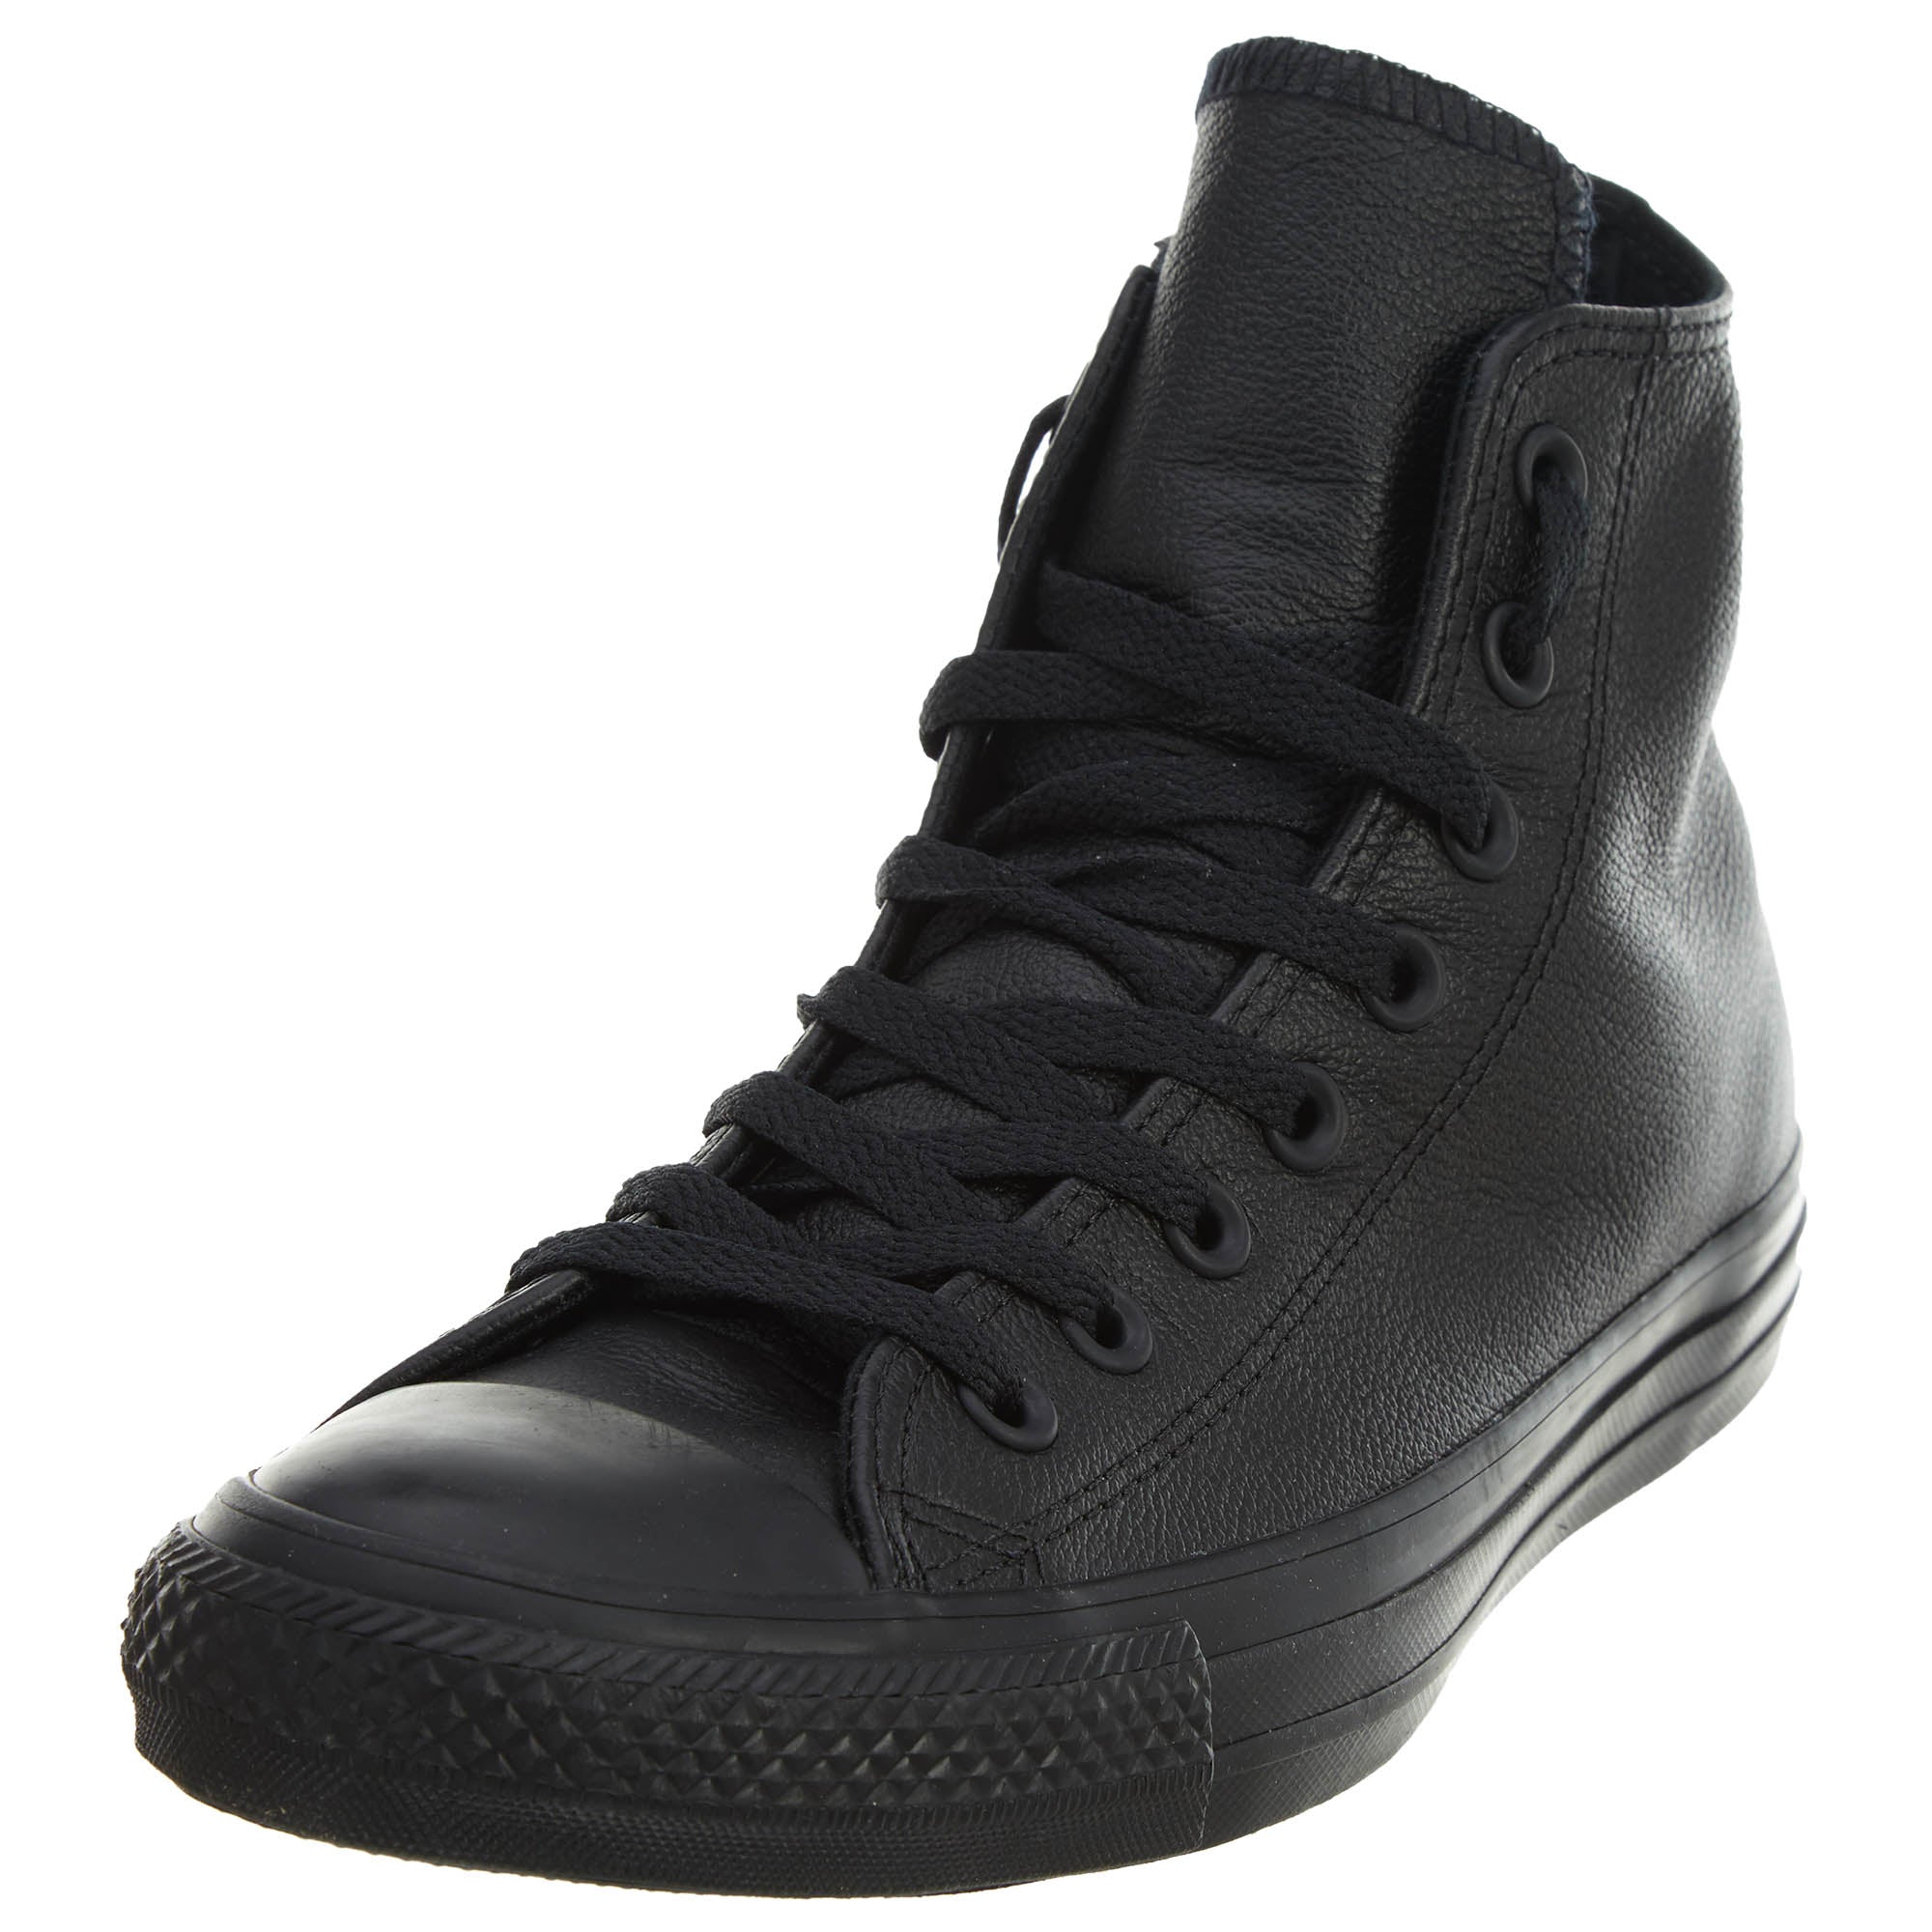 chuck taylor all star leather high top sneaker